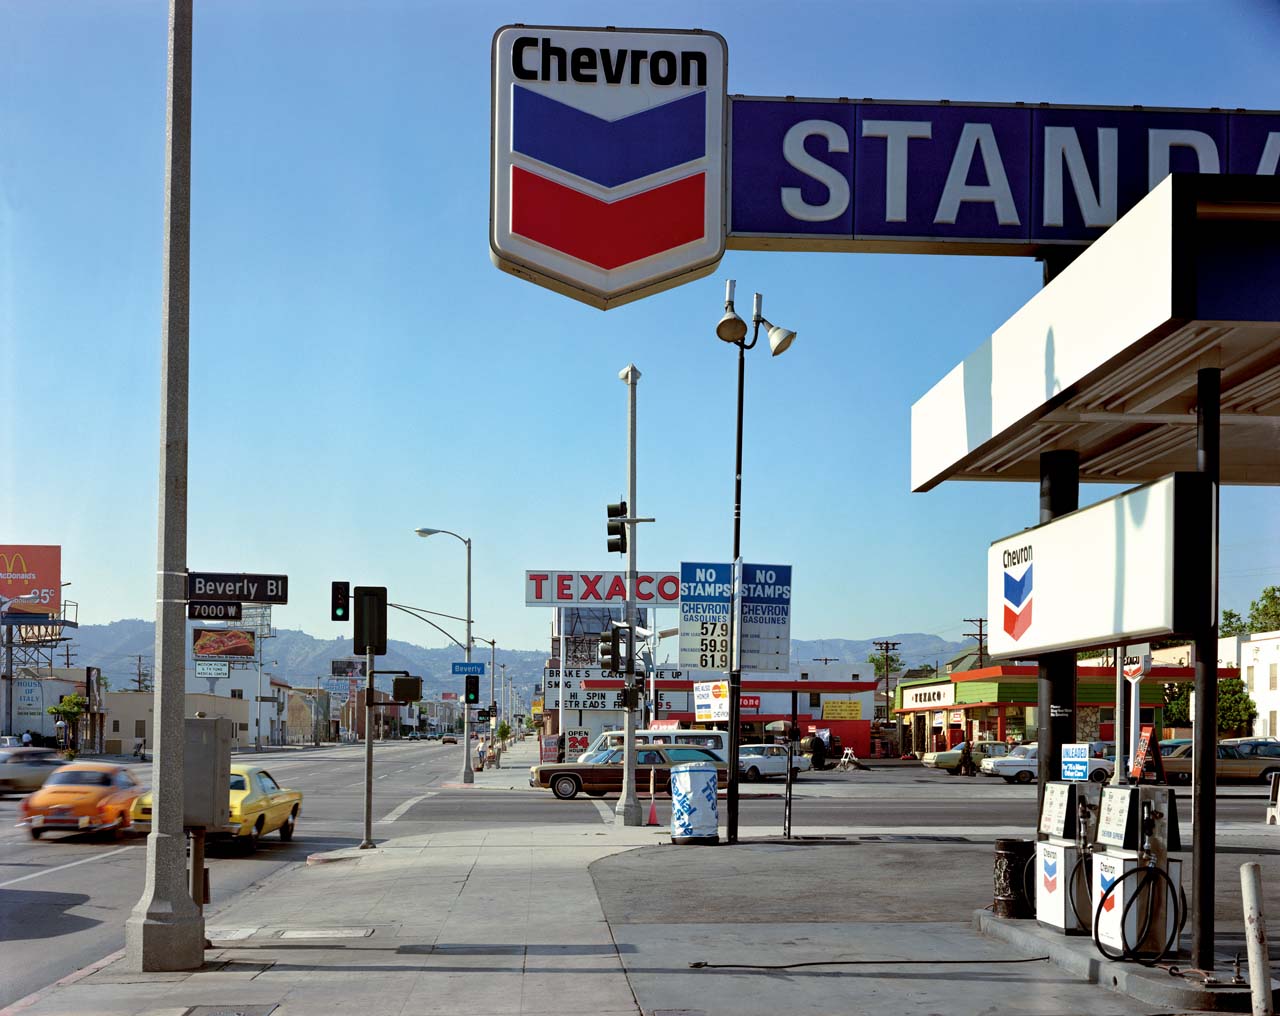 Beverly Boulevard at La Brea Avenue, Los Angeles, California,21 June 1975. From the Uncommon Places series. © Stephen Shore. Courtesy 303 Gallery, New York.